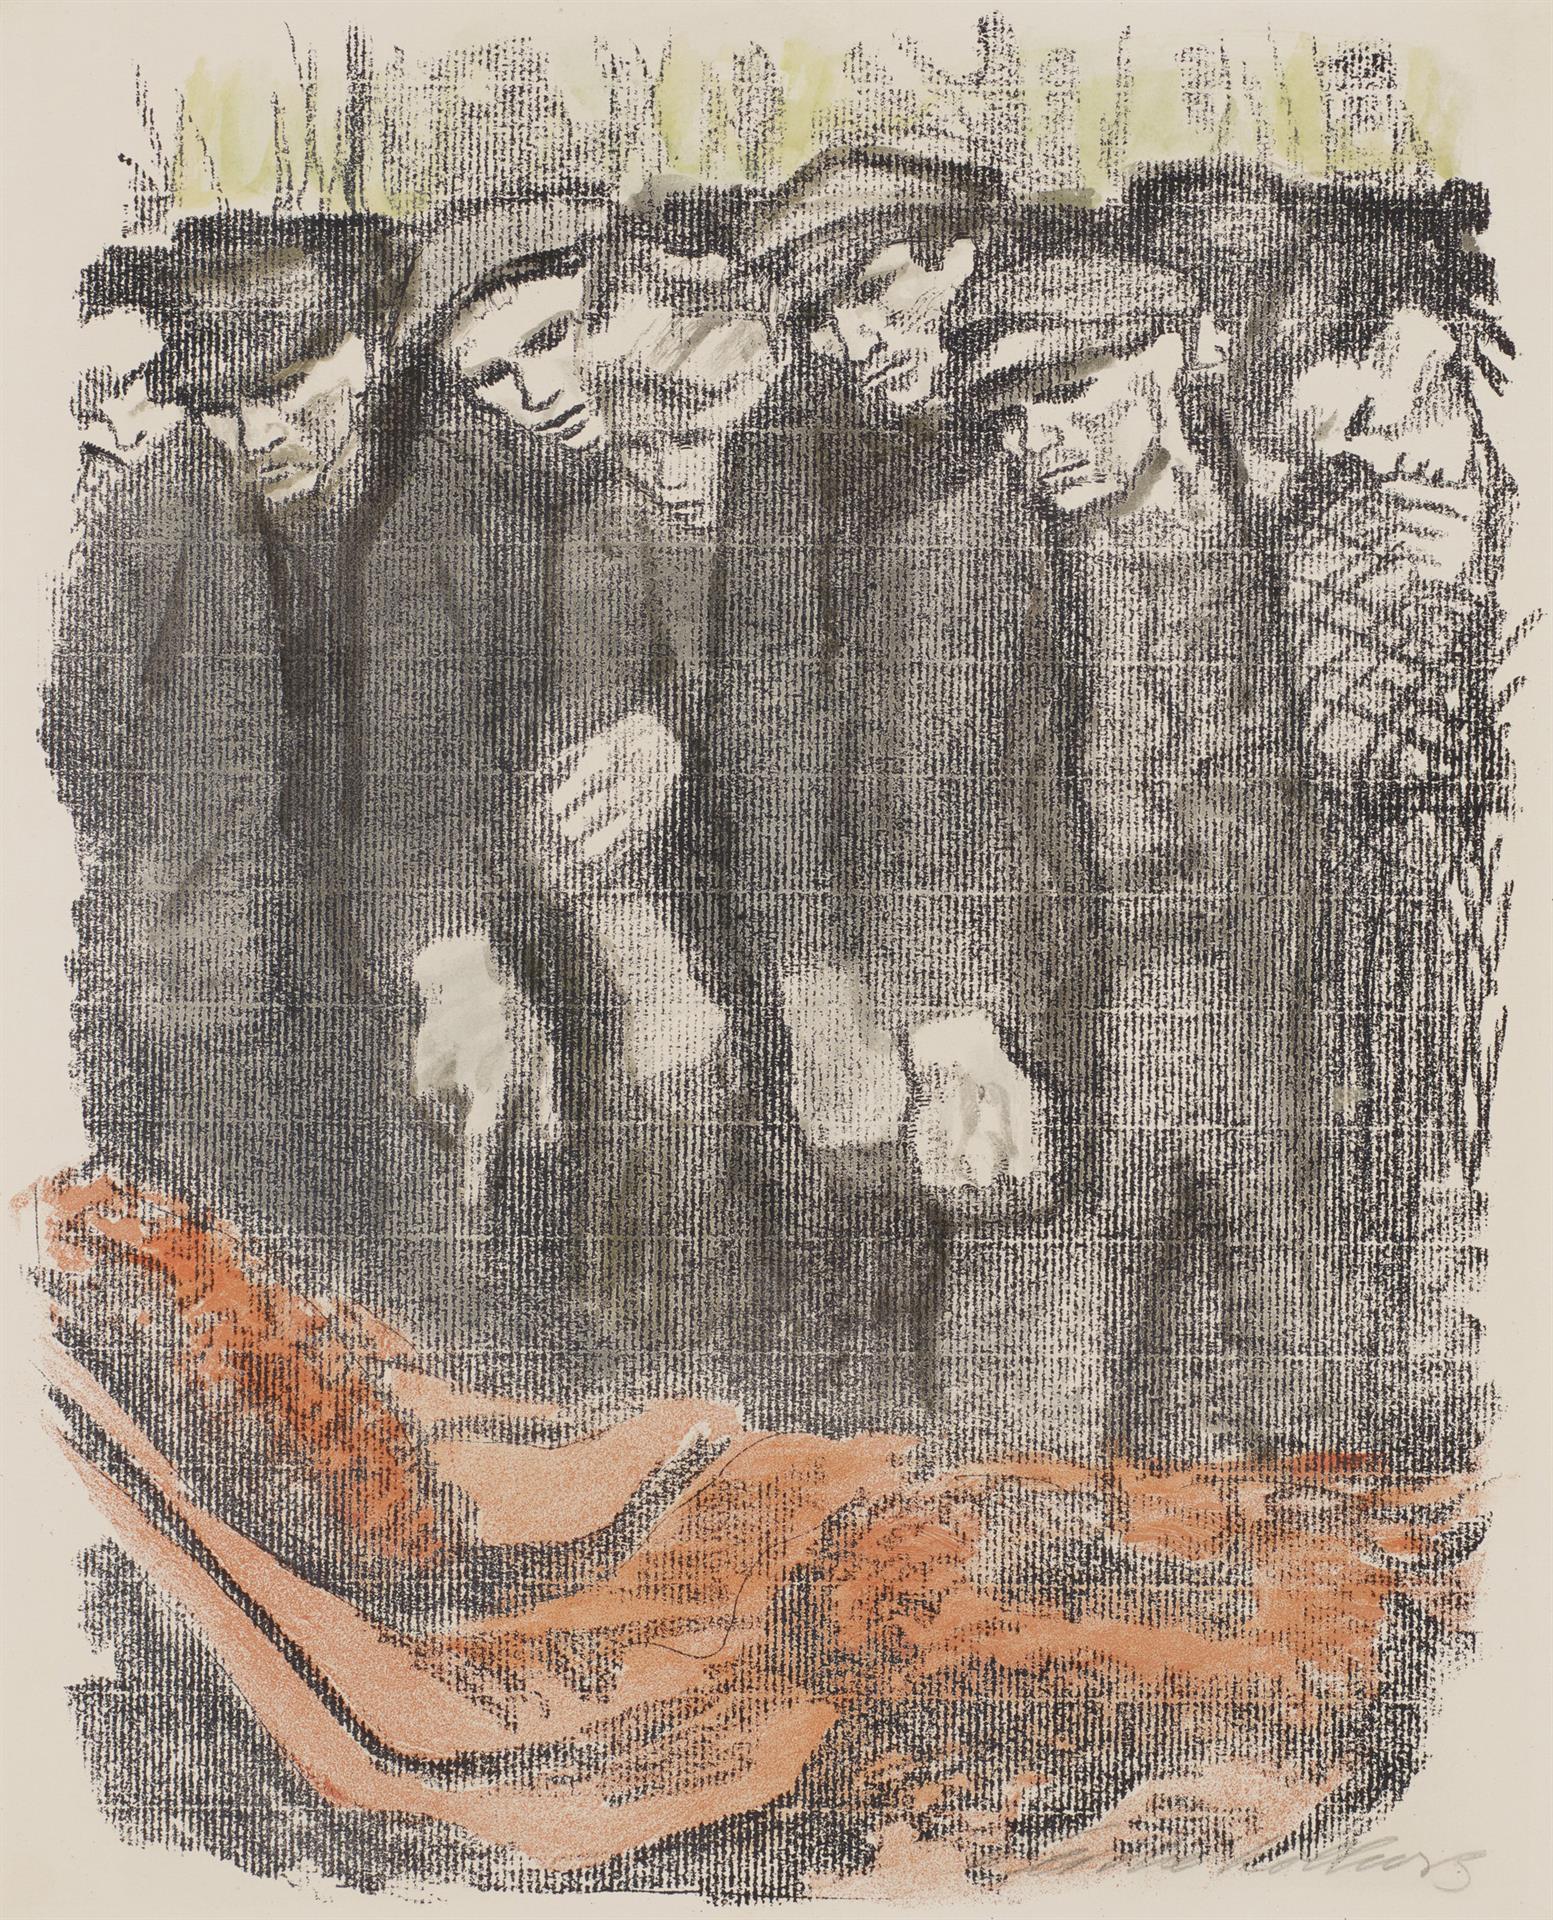 Käthe Kollwitz, March Cemetery, second version, 1913, crayon lithograph in two colors (transfer of an unknown drawing on ribbed laid paper, Kn 128, Cologne Kollwitz Collection © Käthe Kollwitz Museum Köln